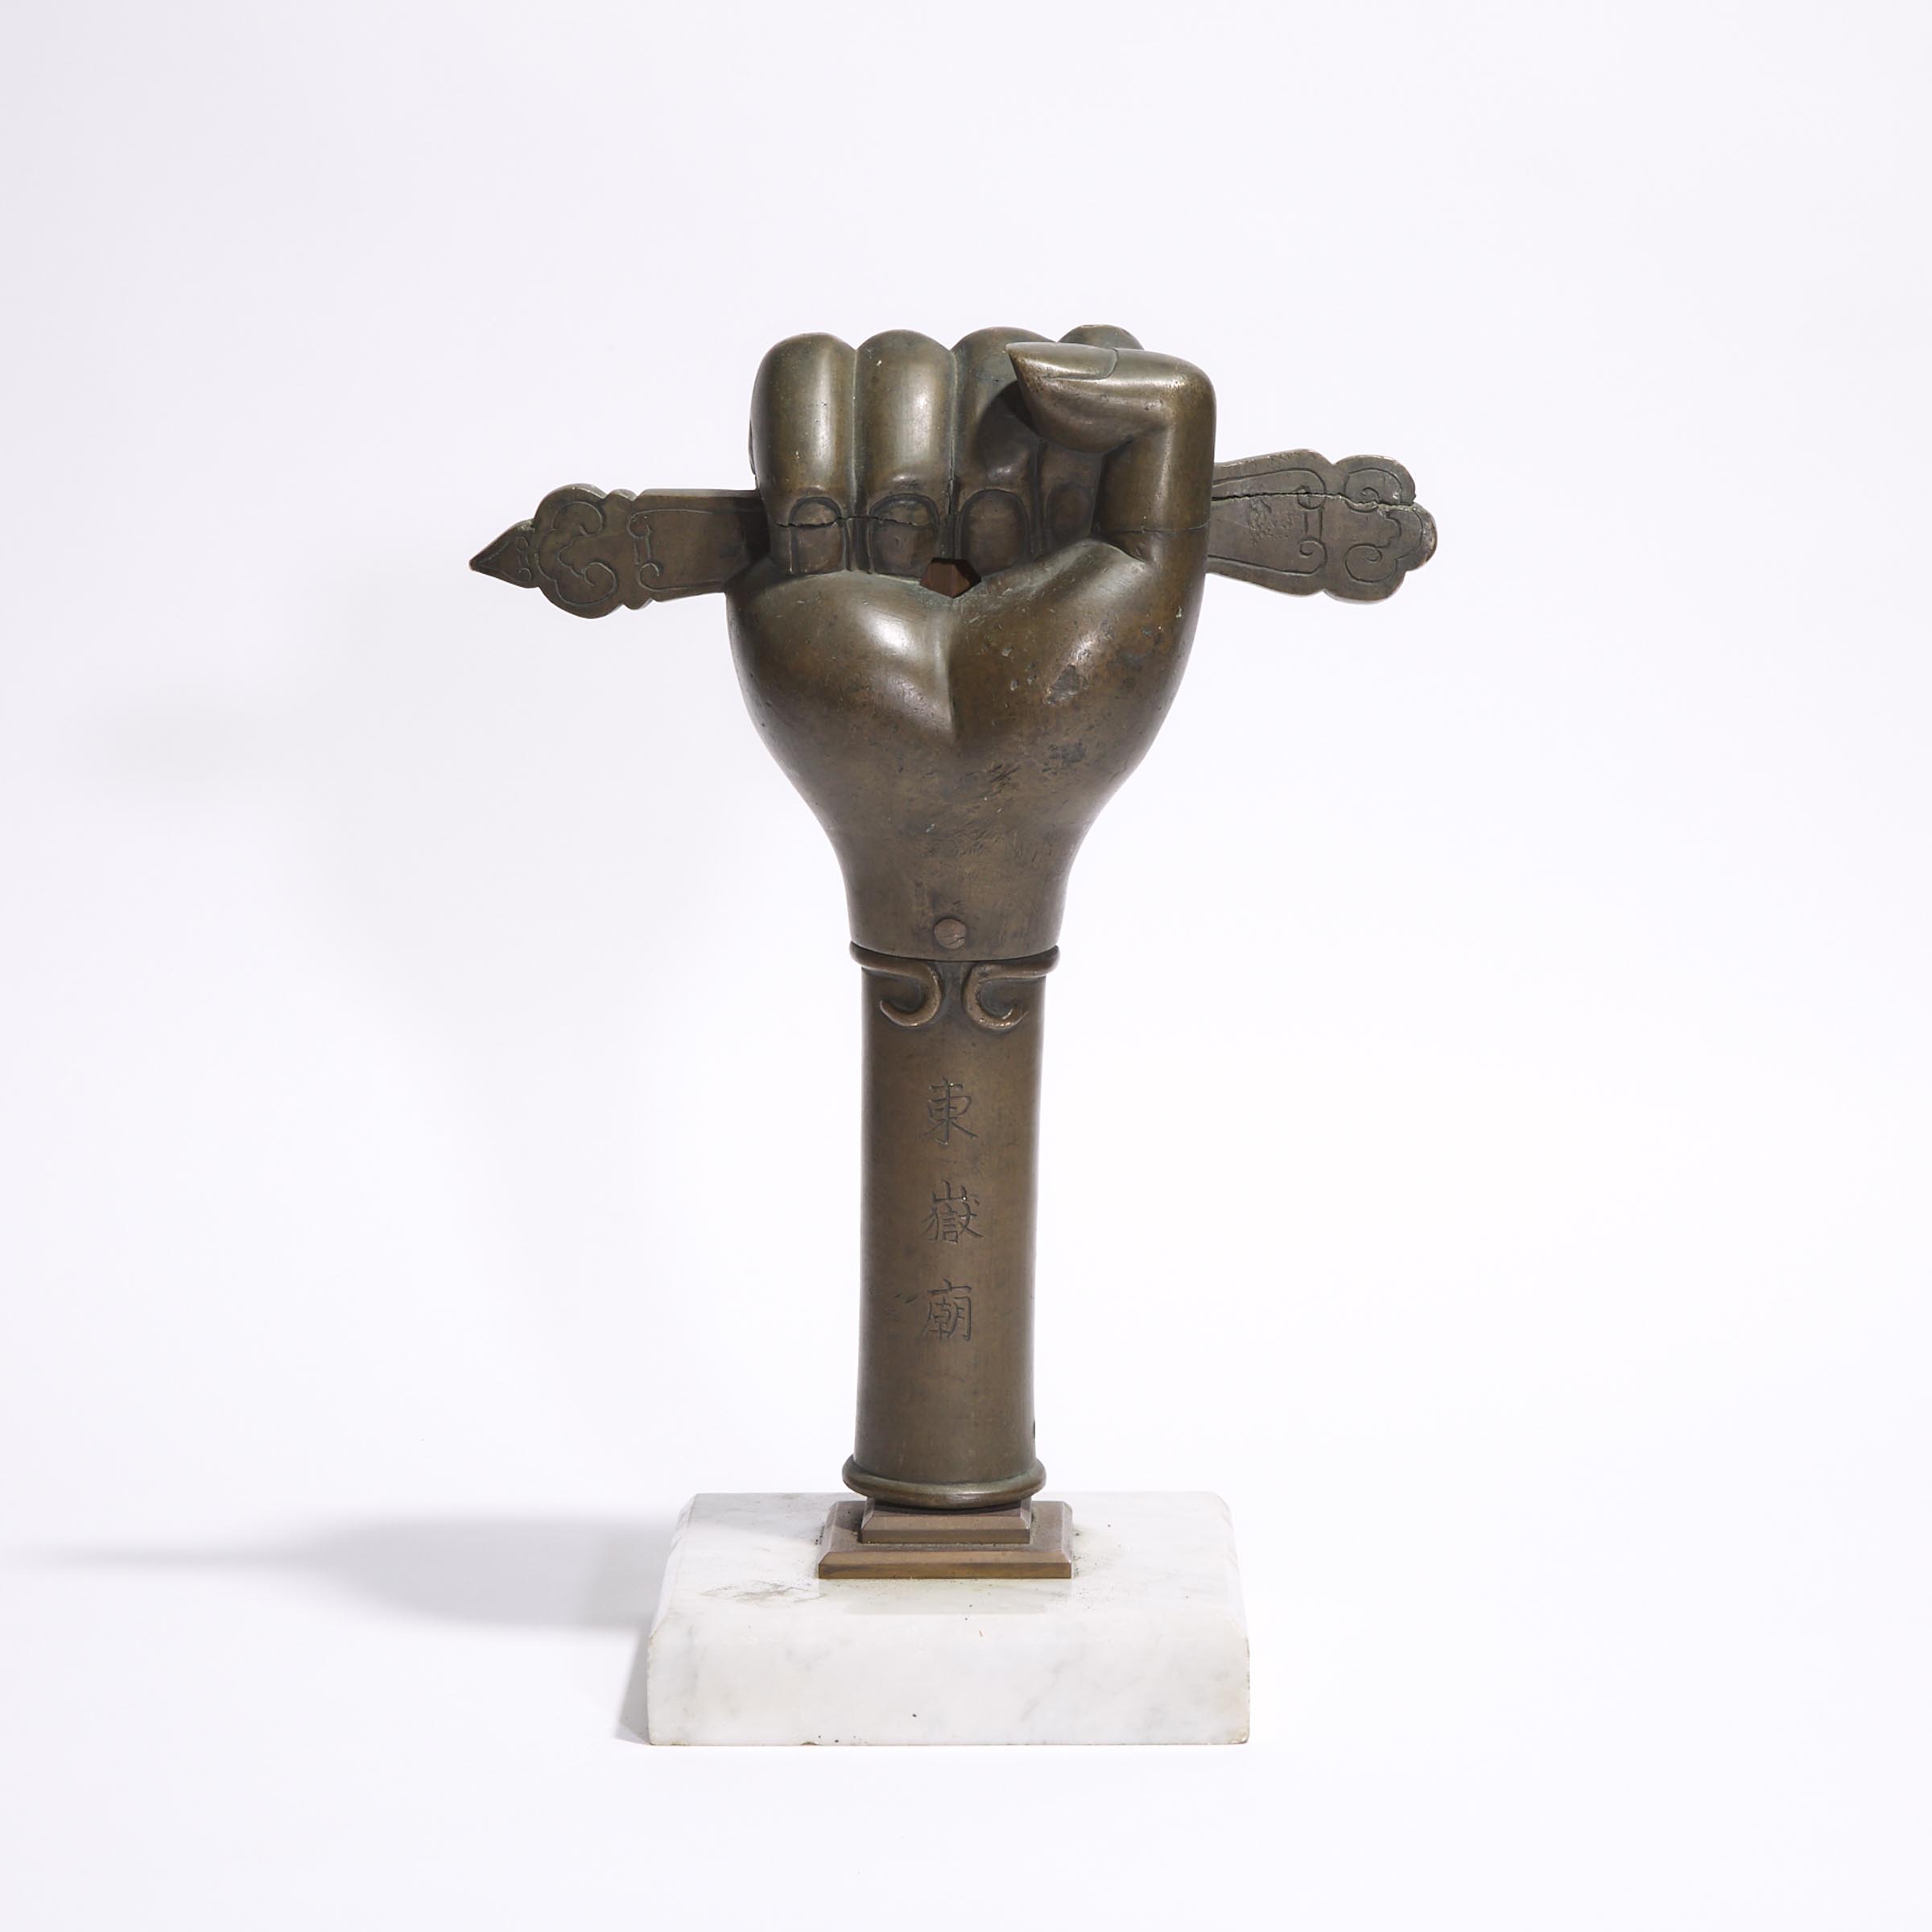 A Bronze Model of a Fist, Inscribed Dongyue Temple, Dated 1812